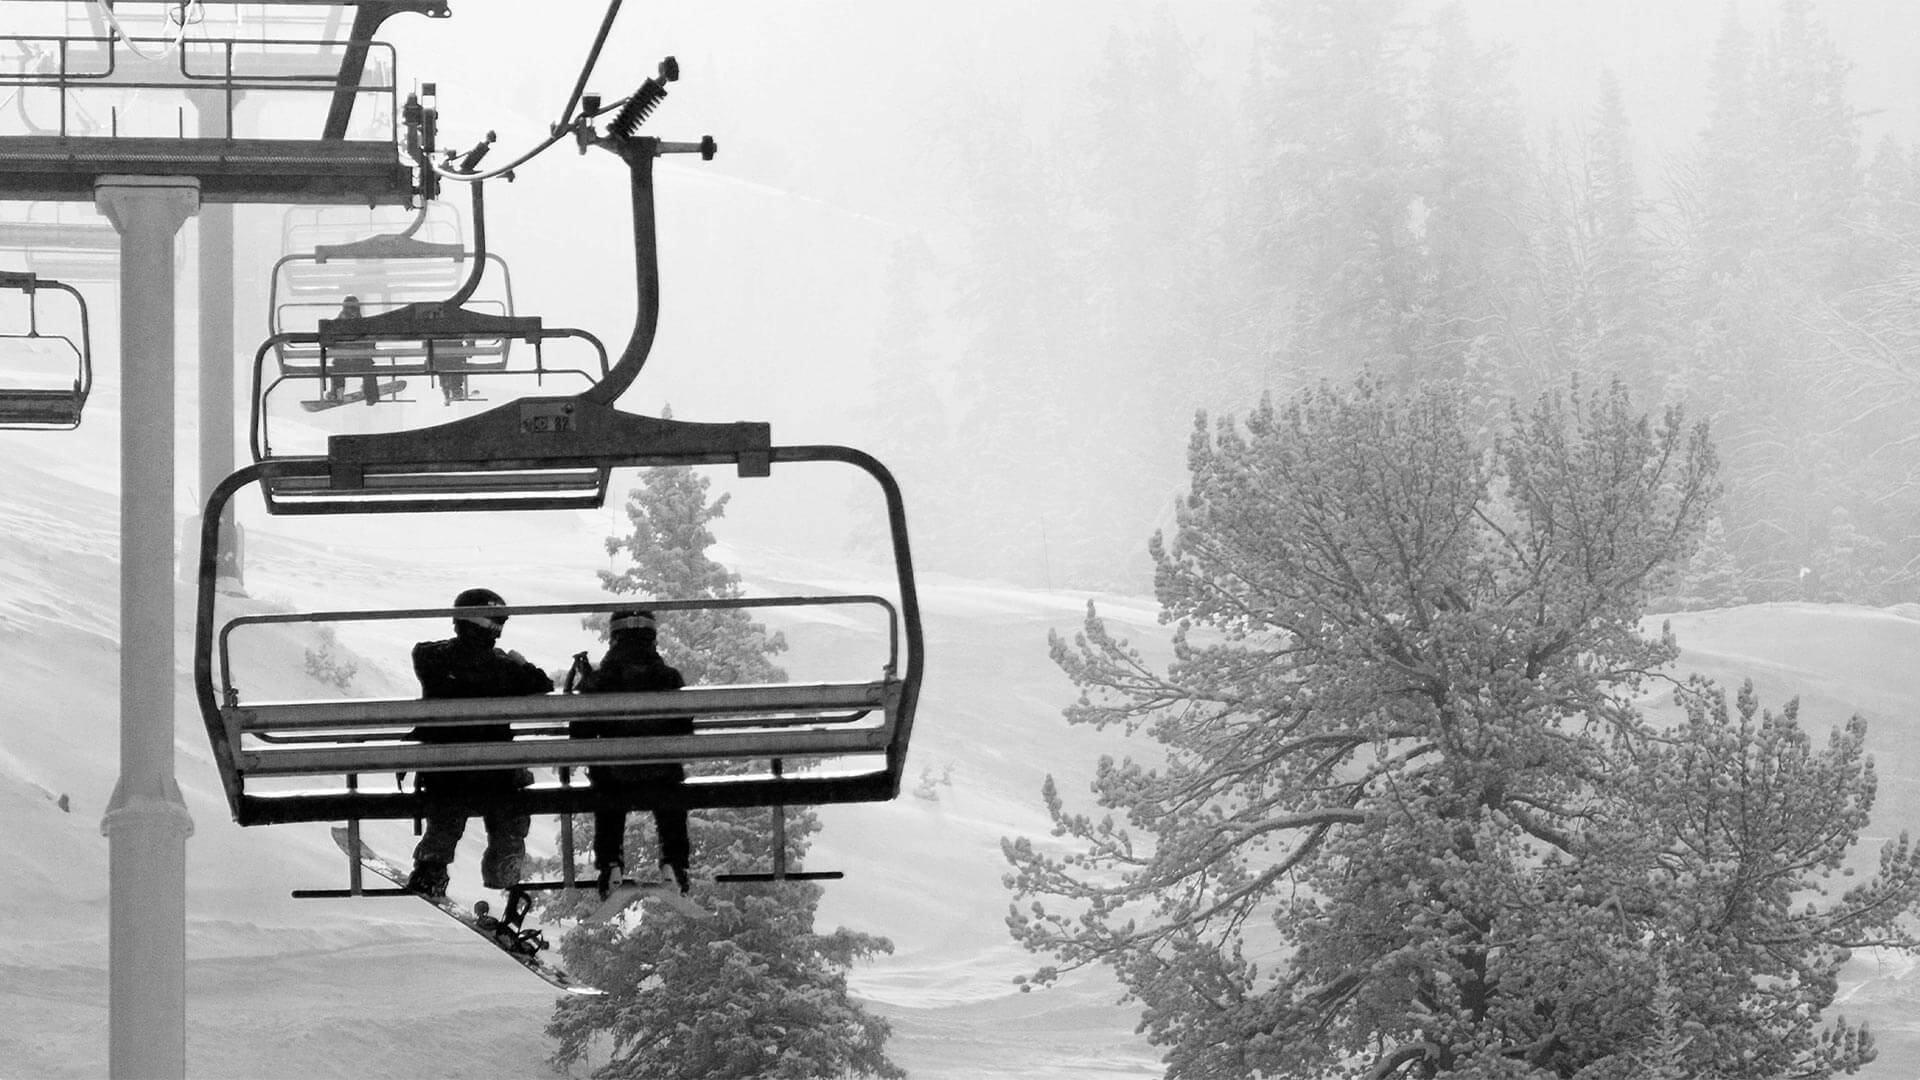 Two People on Ski Chair Lift at Big Sky While Its Snowing